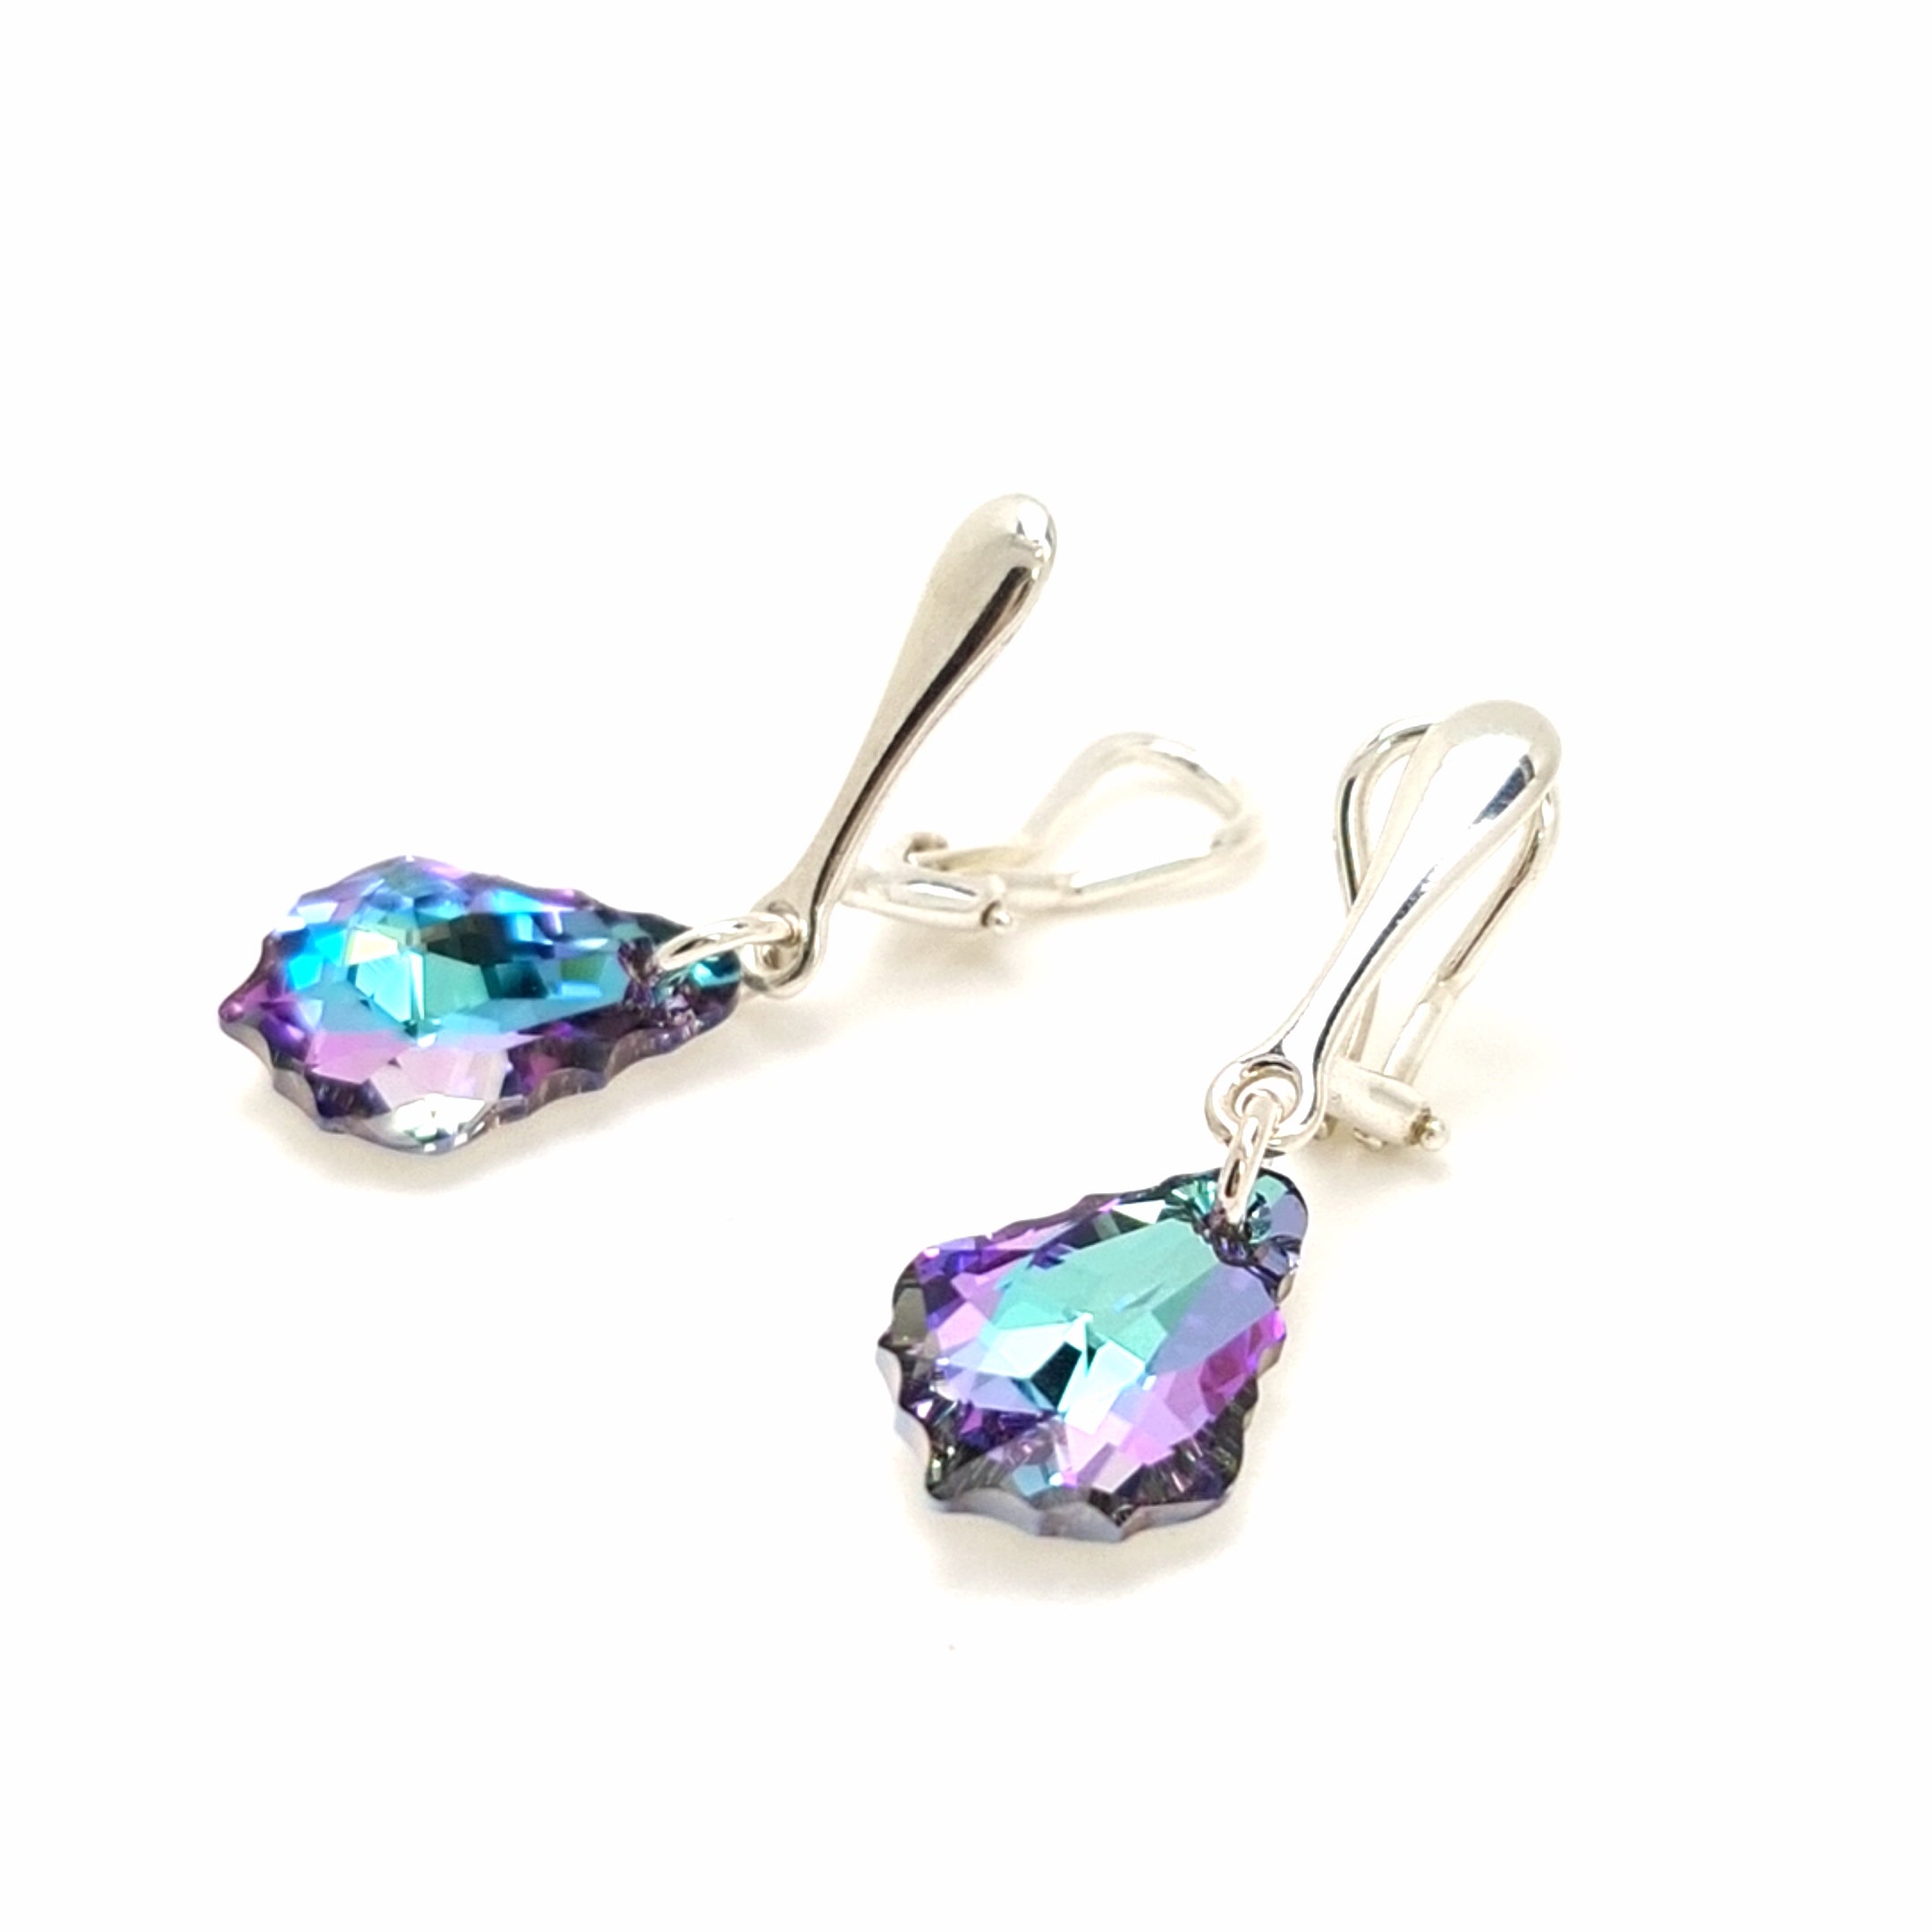 Dangly drop Clip on earrings in sterling silver with vitrail light colourful and sparkly crystals